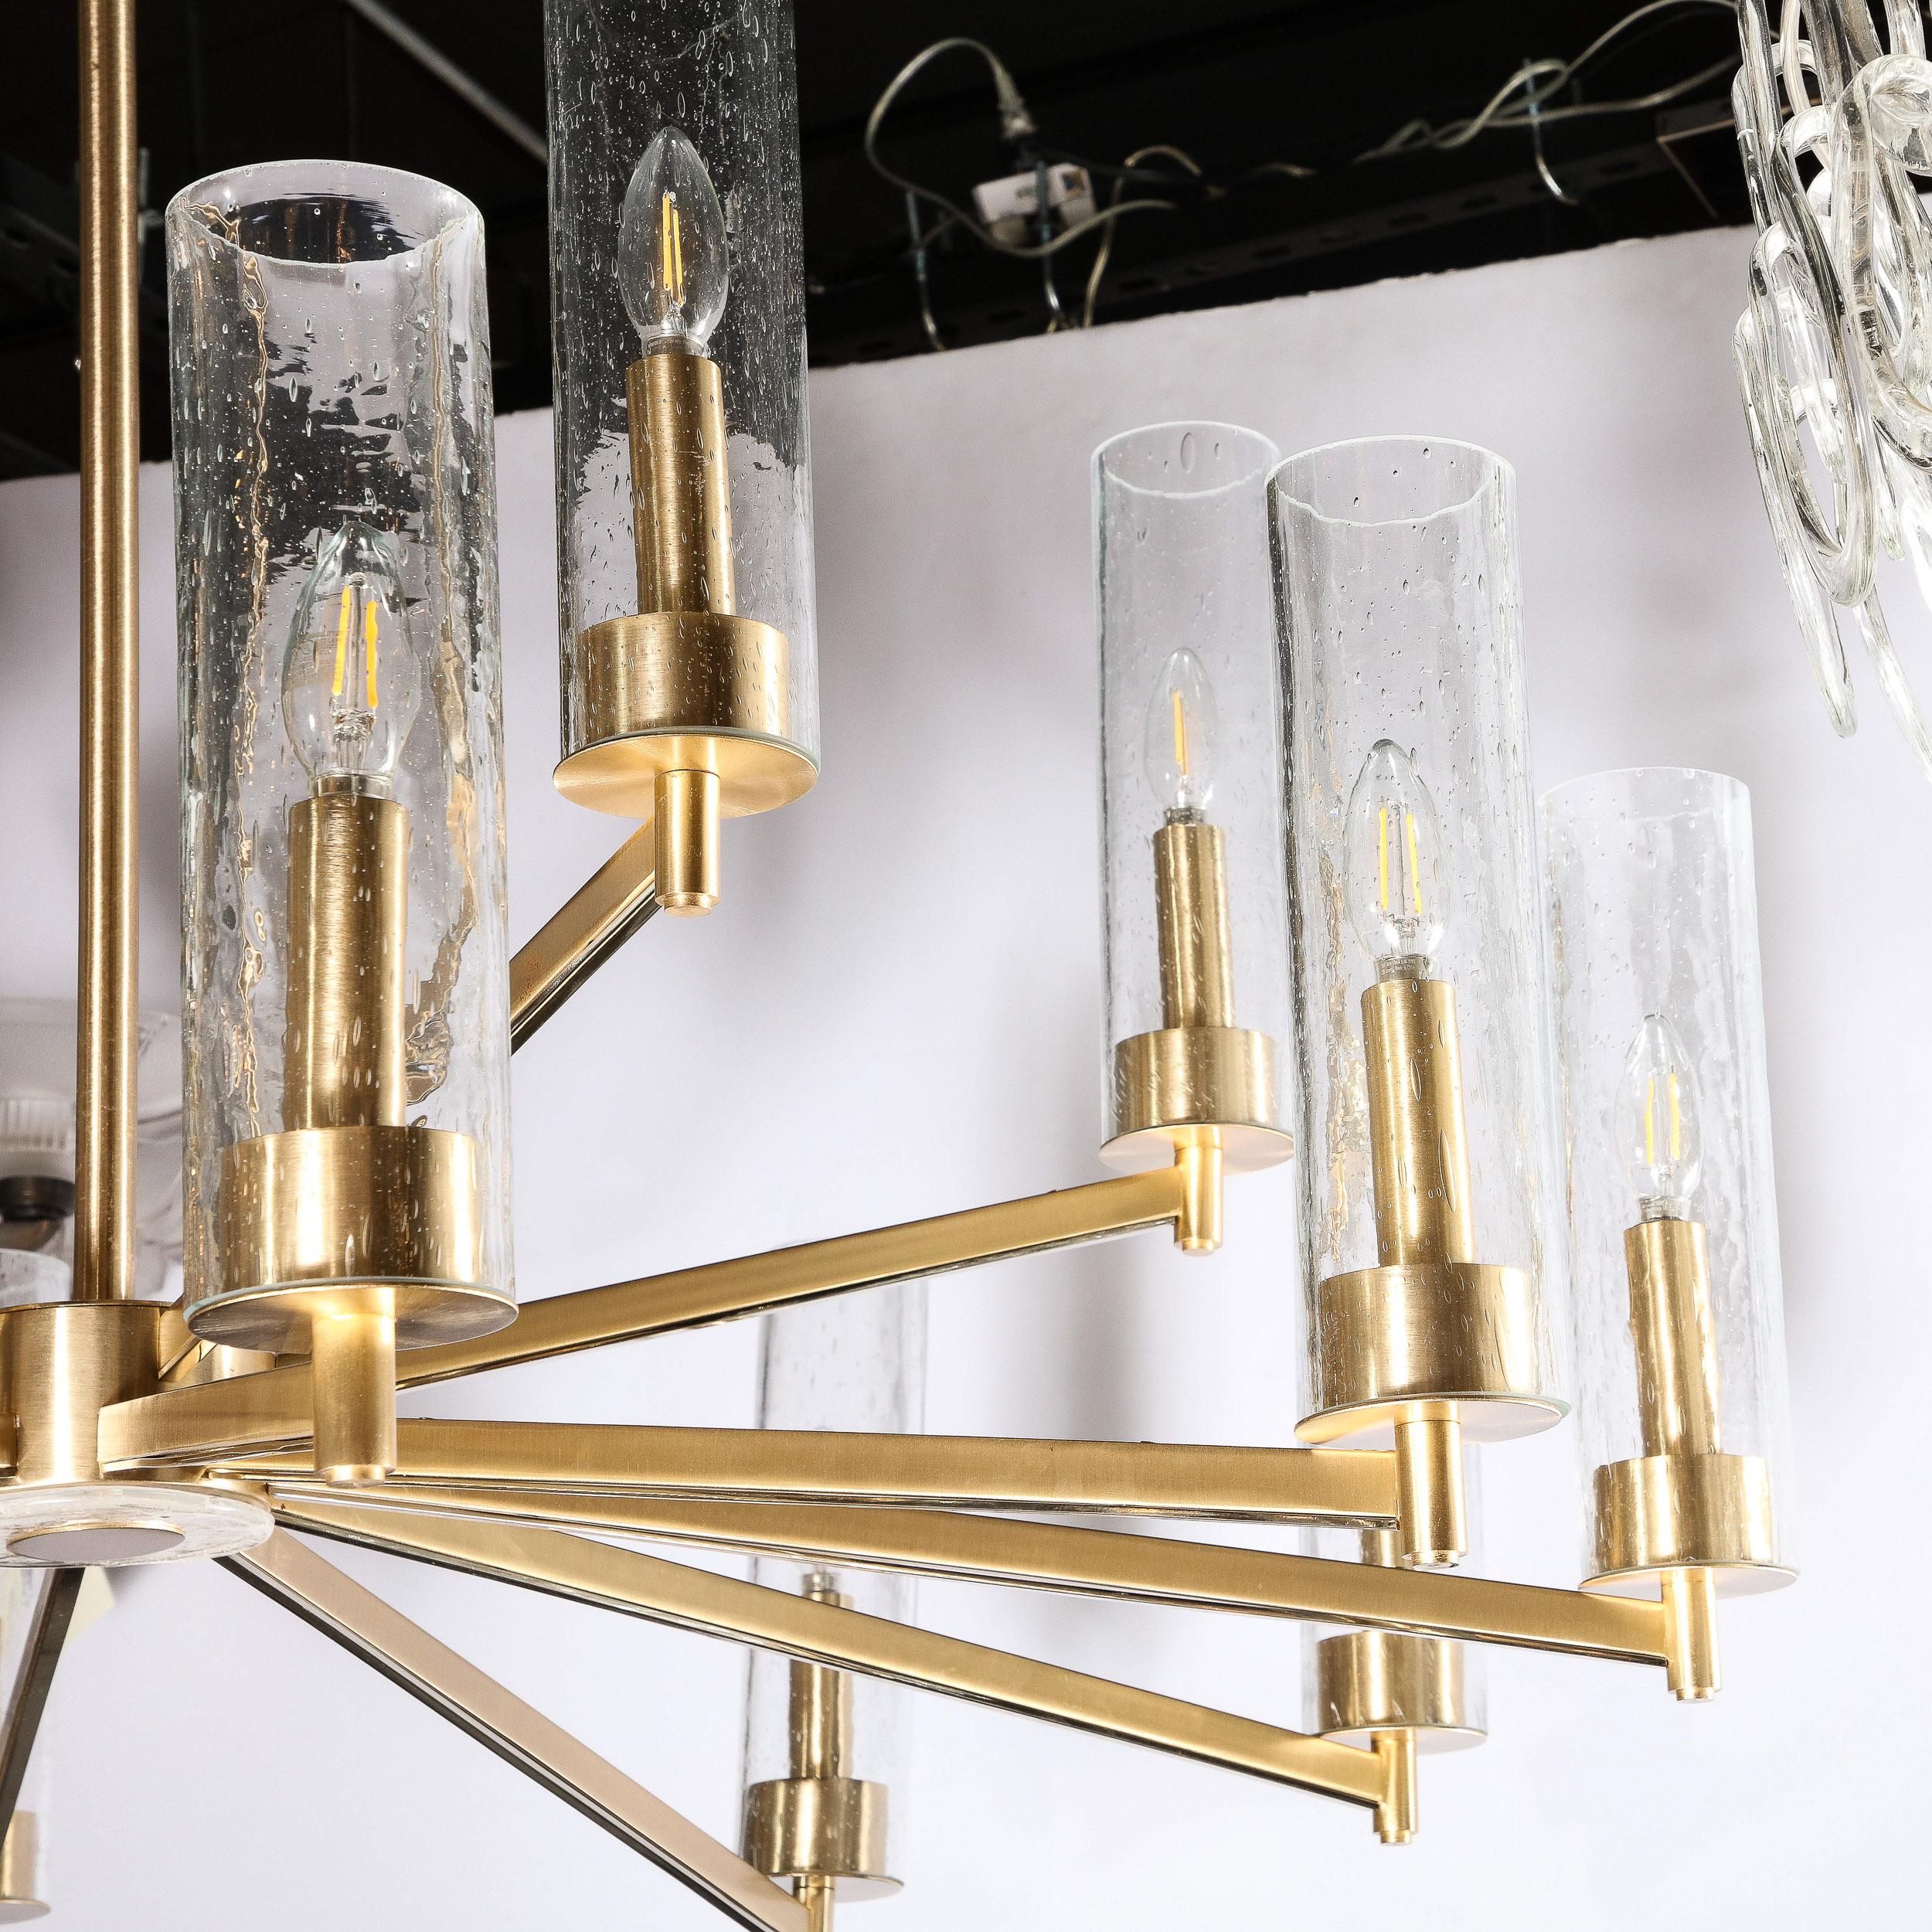 Modernist 15 Arm Chandelier in Brushed Brass & Transparent Cylindrical Shades For Sale 6